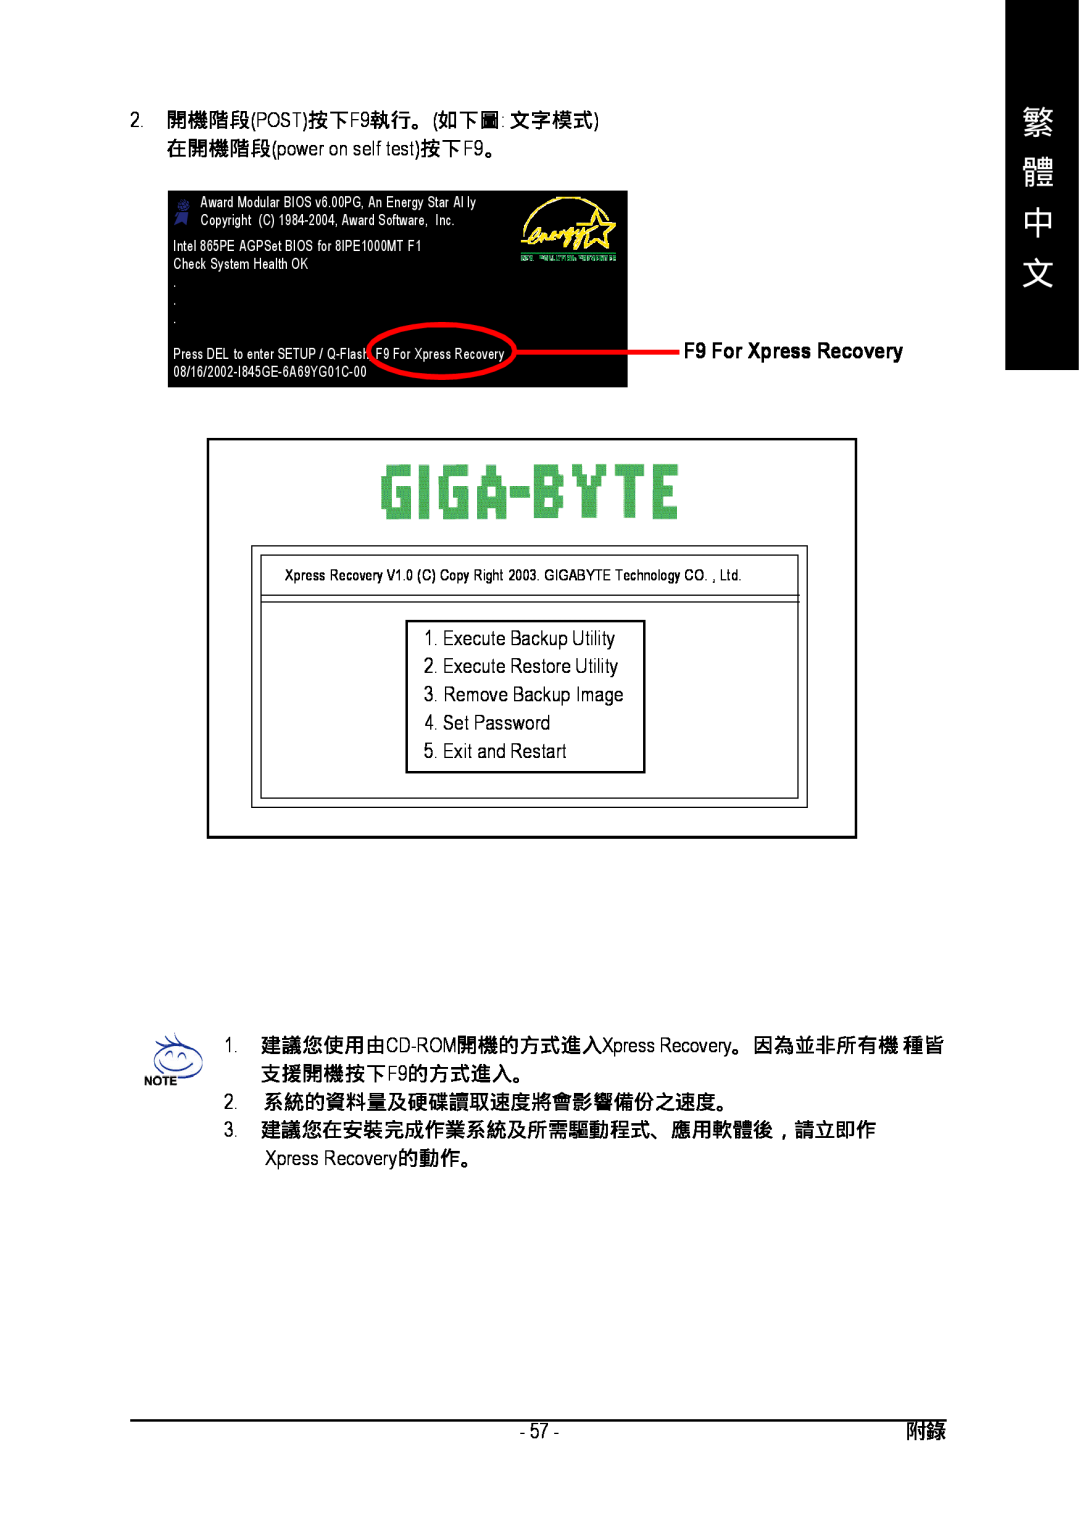 Gigabyte GA-8I915P manual F9 For Xpress Recovery, power on self test 